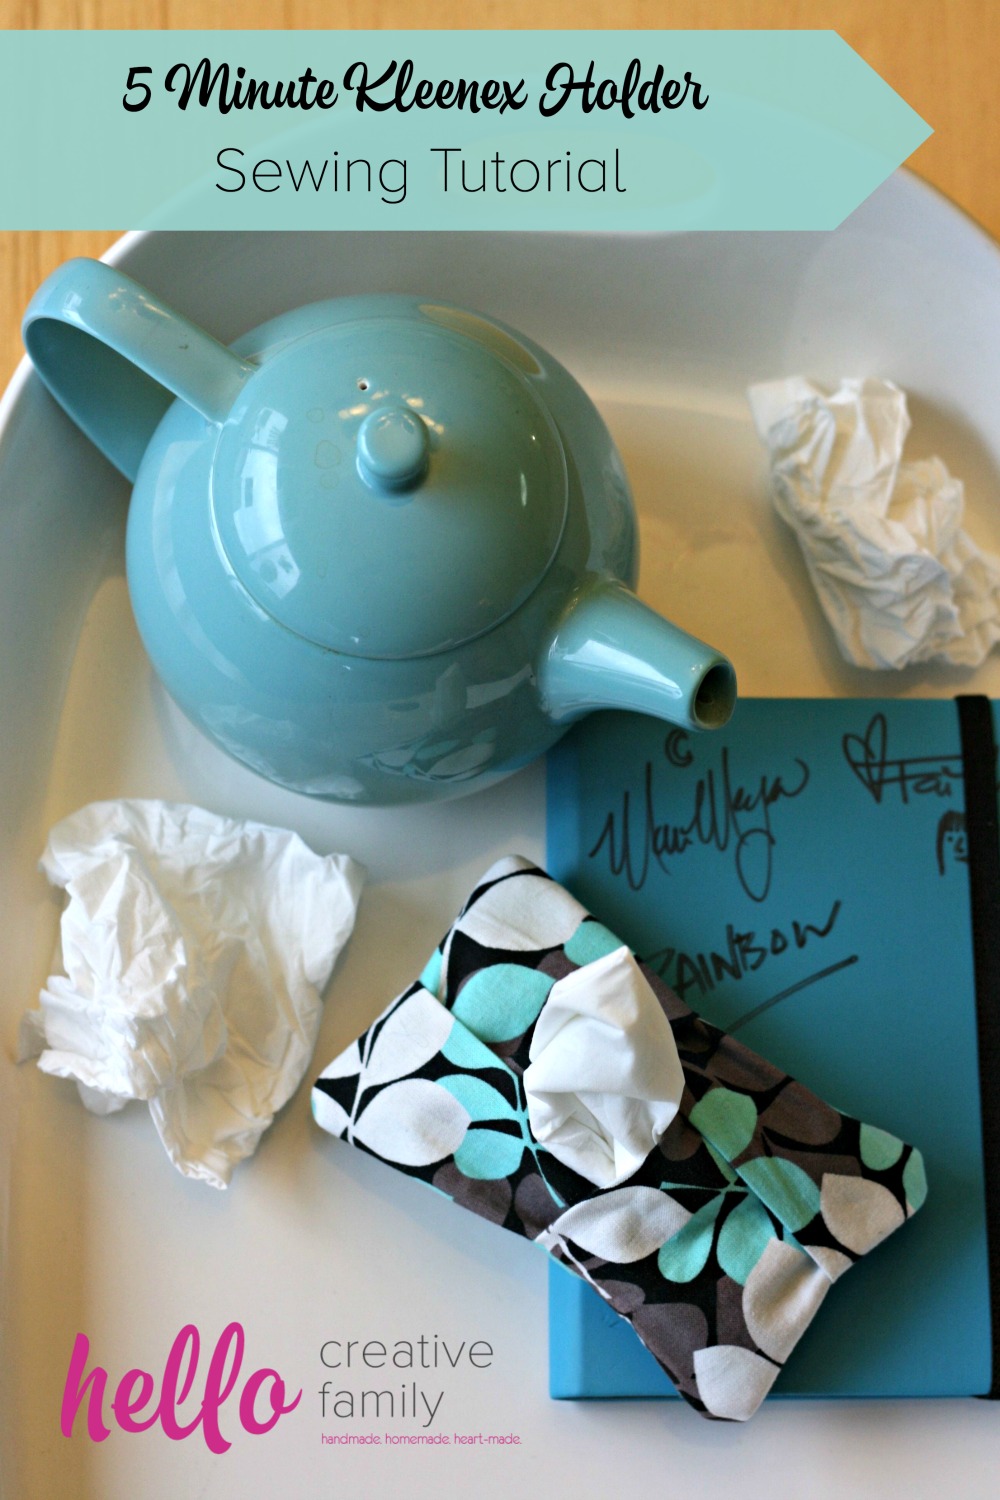 This 5 Minute Tissue:Kleenex Holder is a simple sewing projects for beginners. Whip them up for your kids, teachers and friends during cold and flu season. Perfect for stocking stuffers.